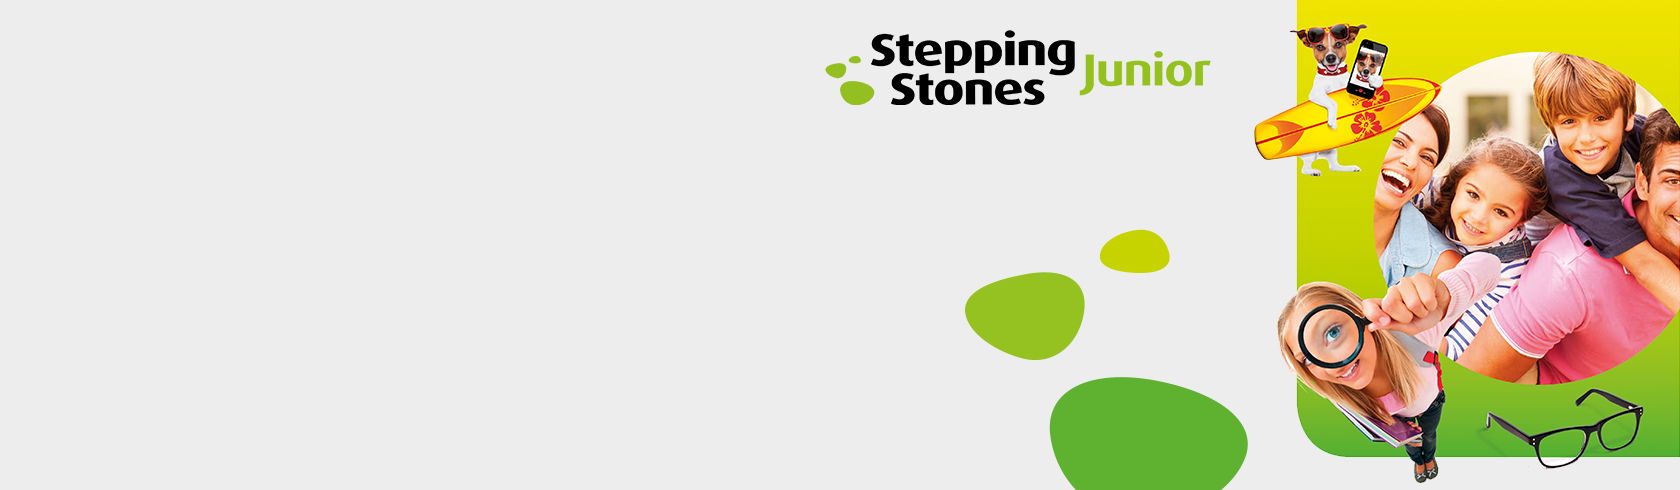 Stepping Stones family